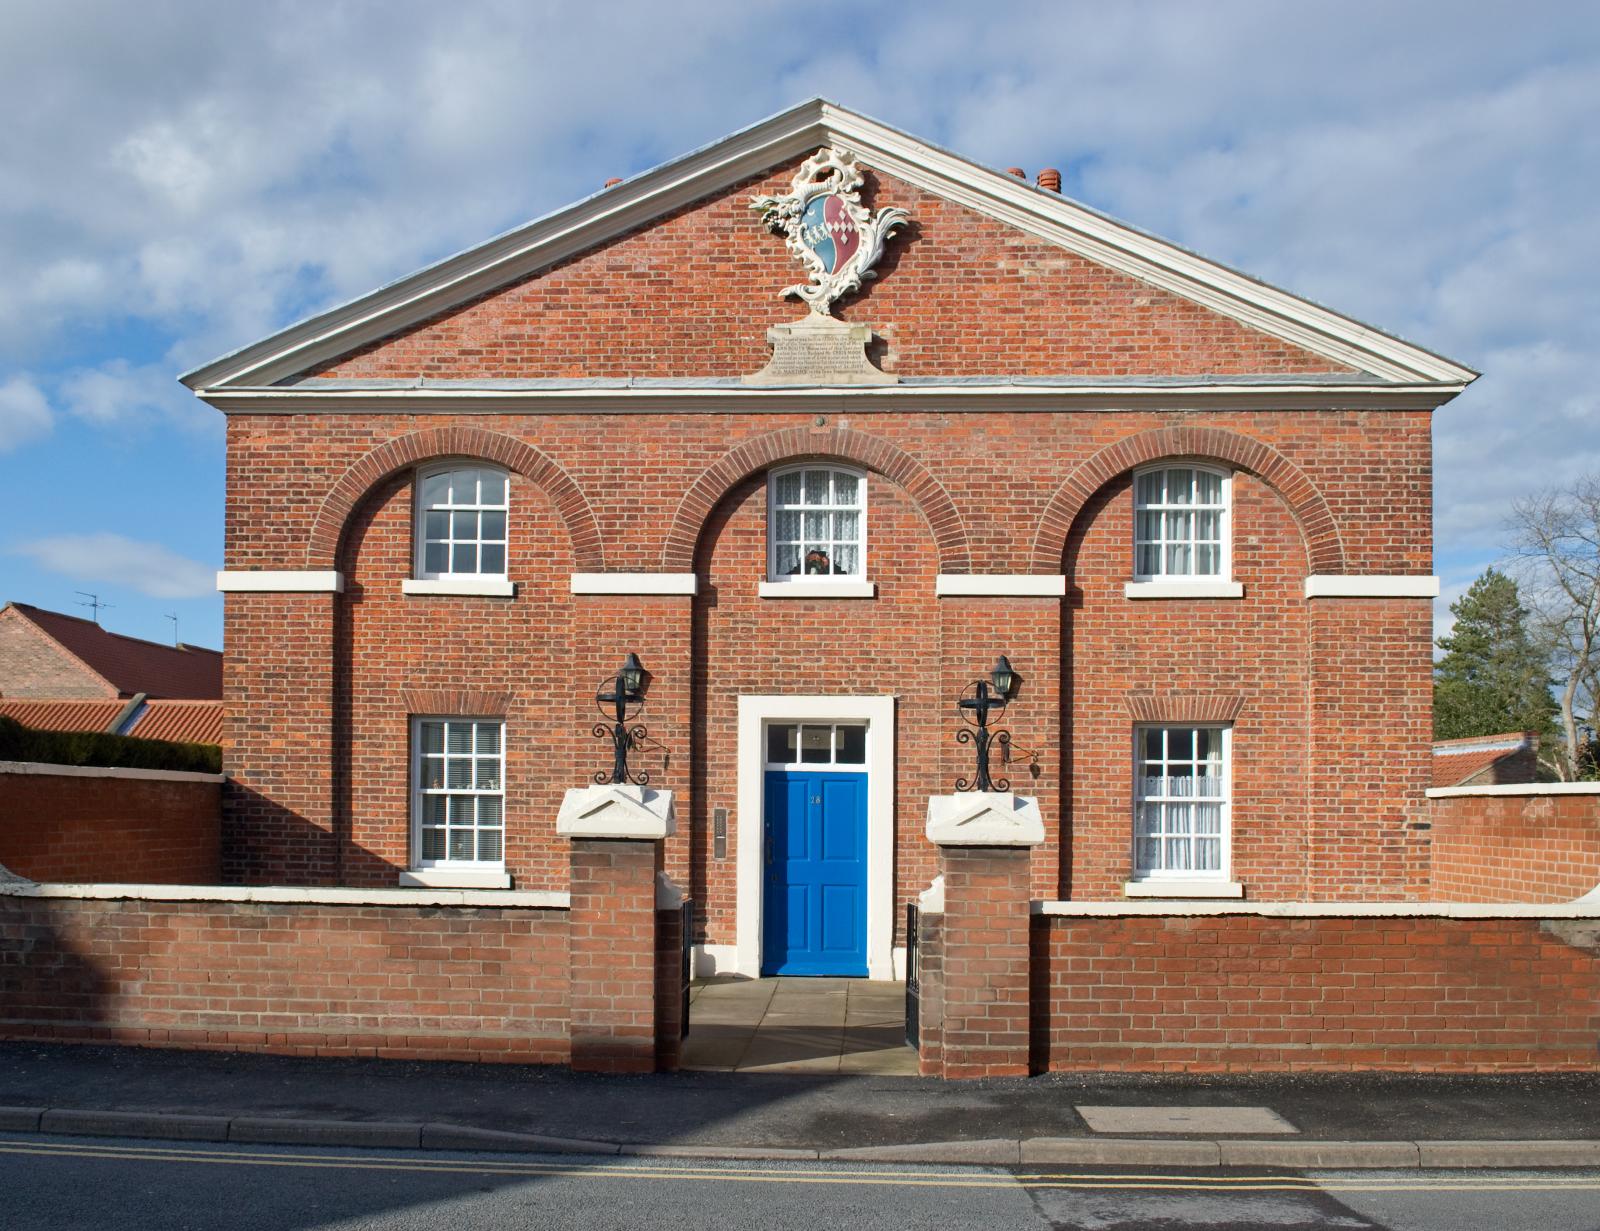 Red brick building with a coats of arms at the top